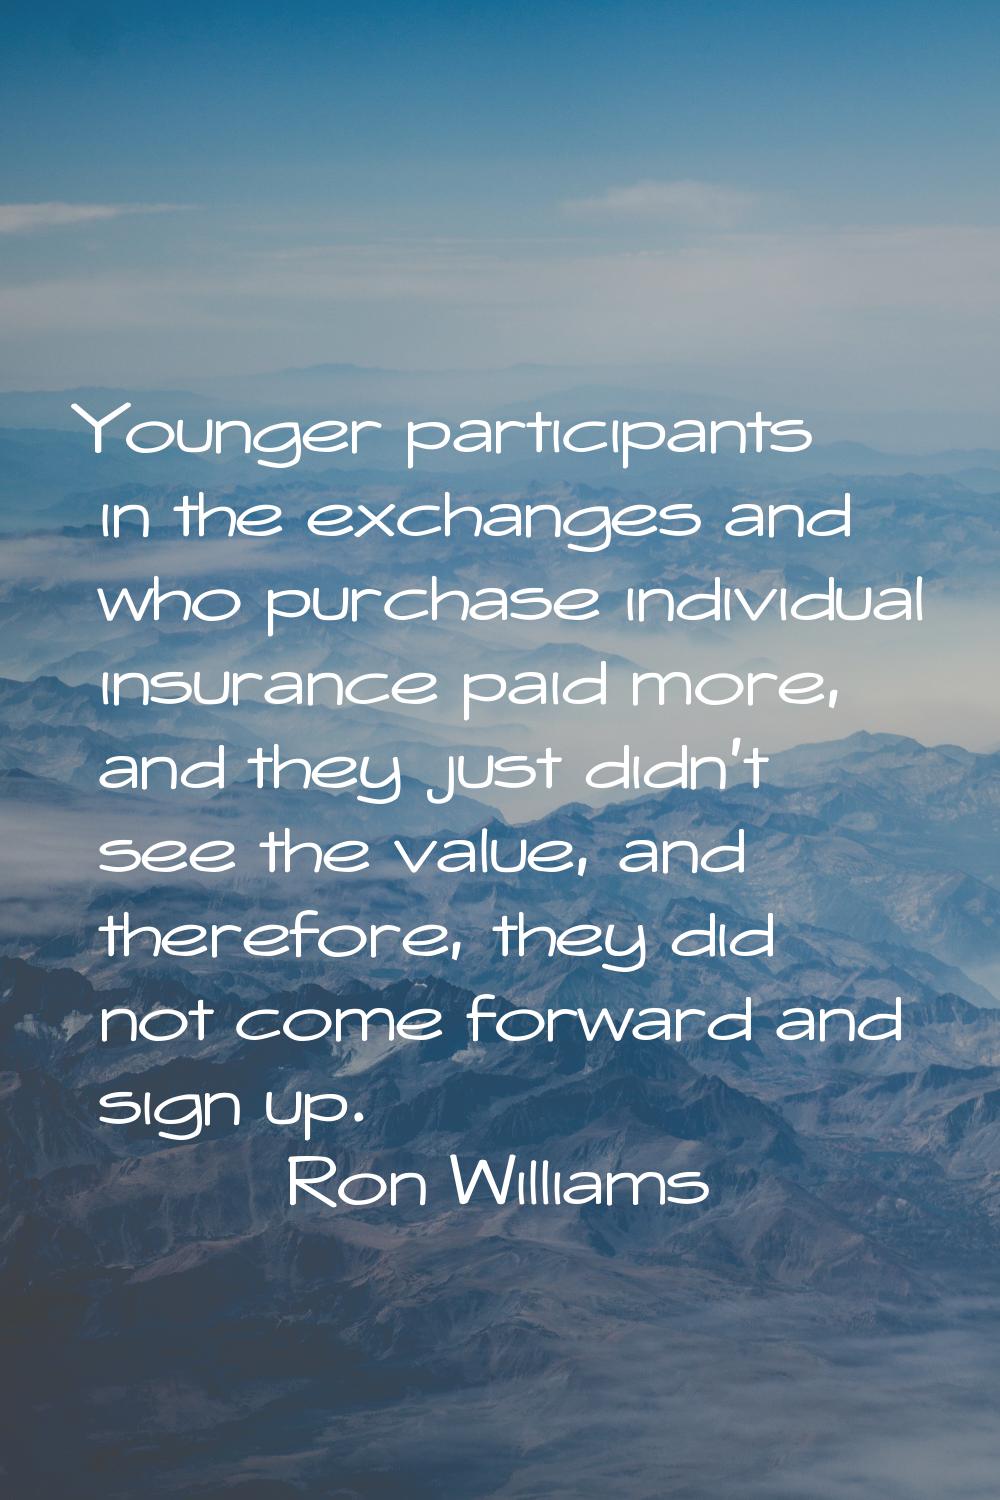 Younger participants in the exchanges and who purchase individual insurance paid more, and they jus